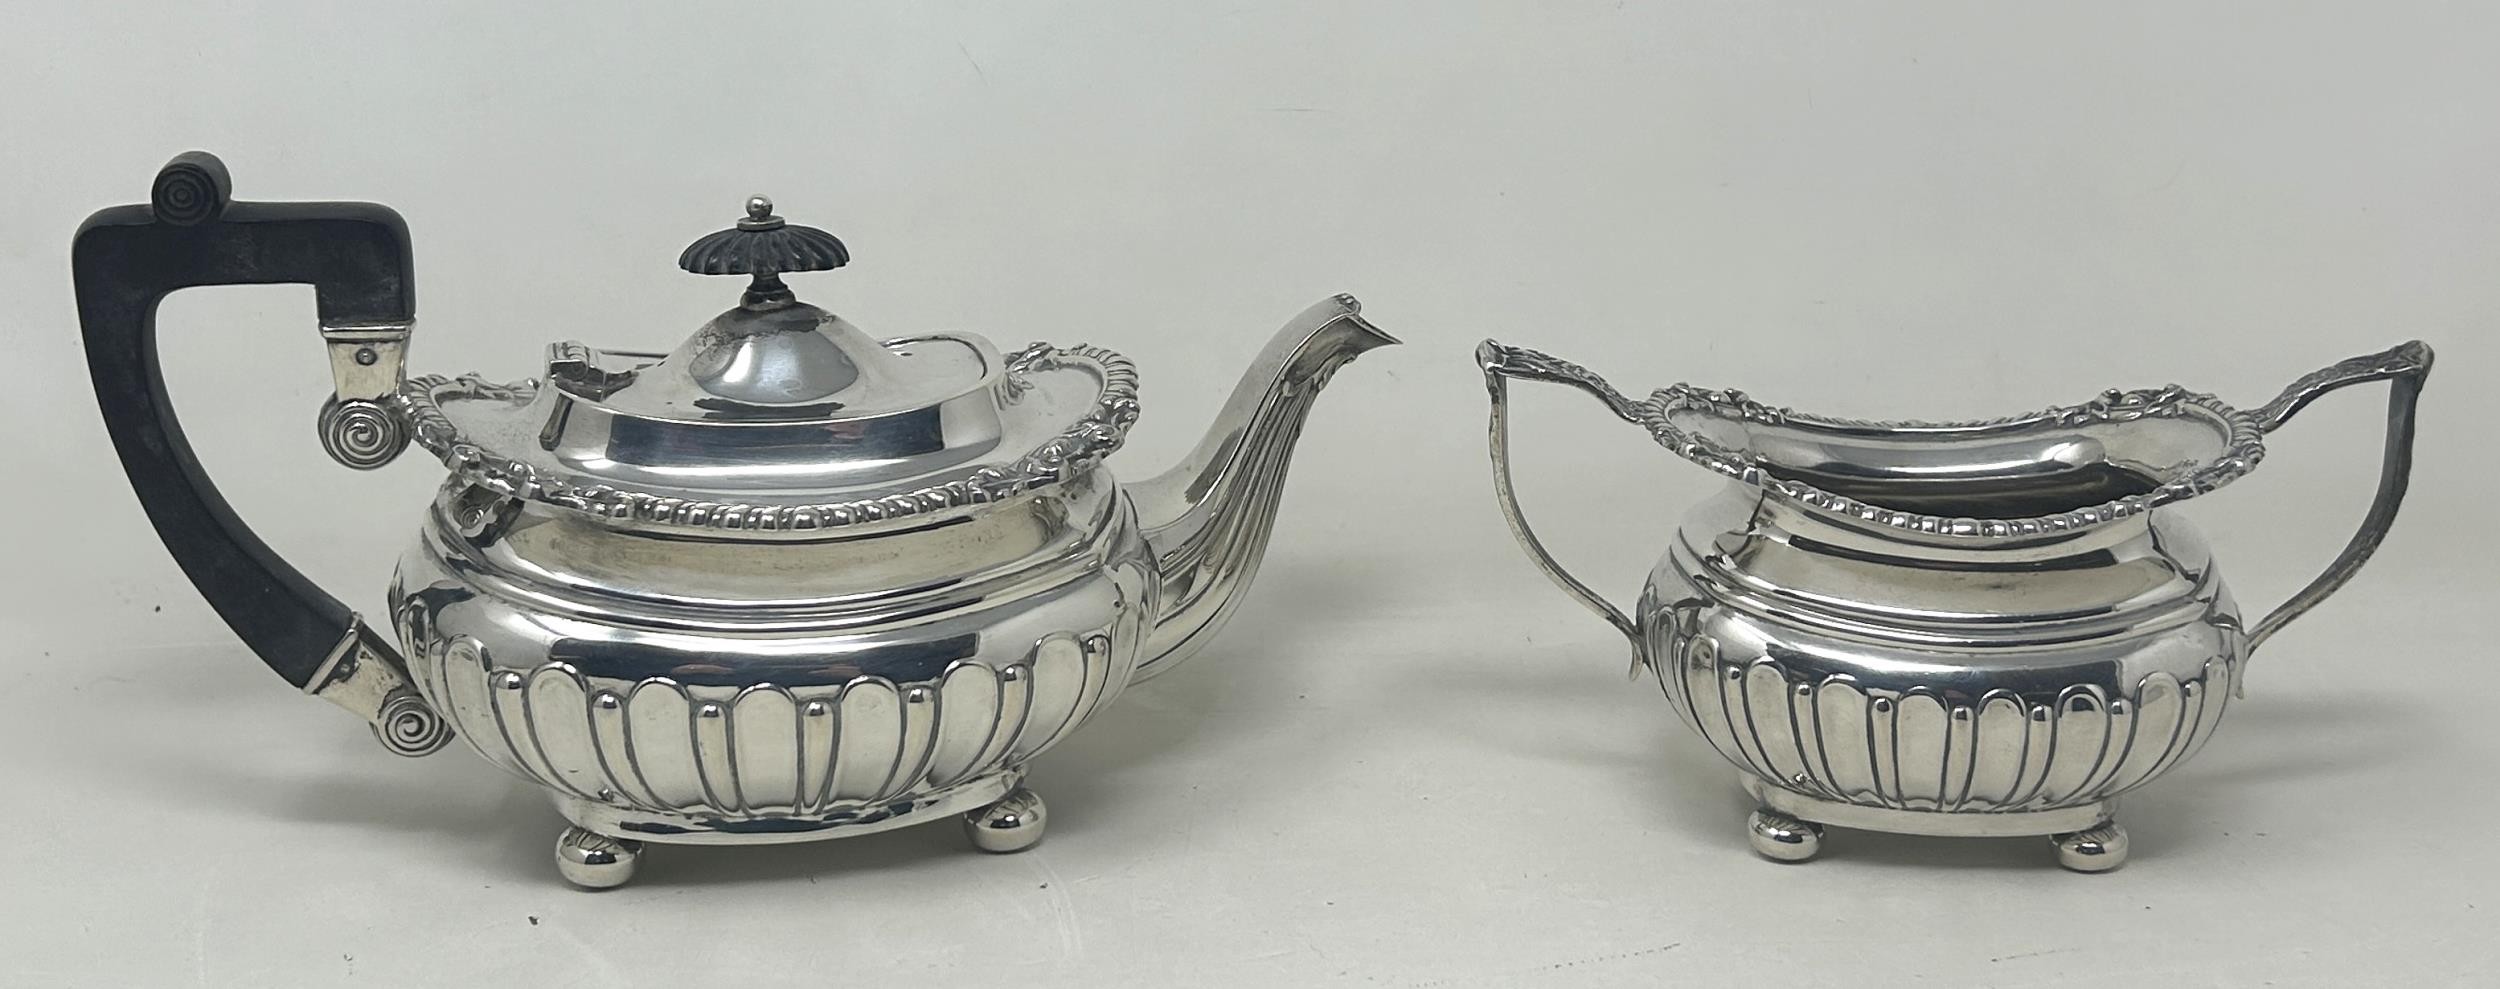 A George V silver bachelor teapot with an ebonised handle, and matching sugar bowl, London 1909, all